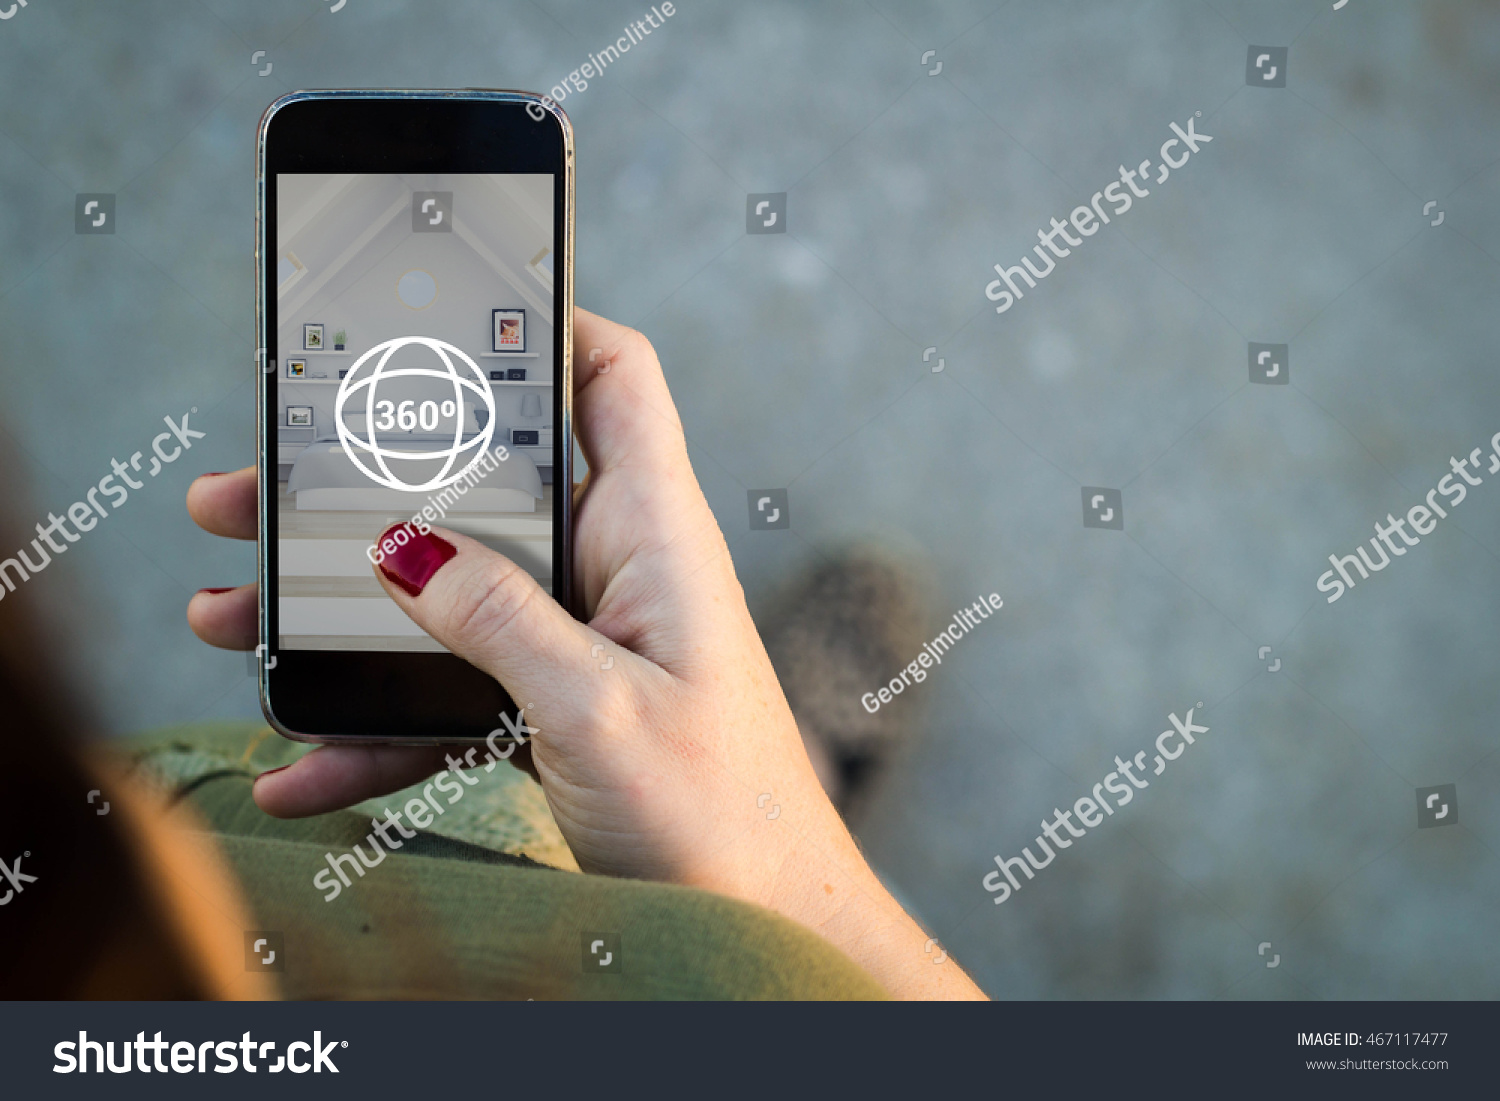 Top view of woman walking in the street surfing 360 degree view in her mobile. All screen graphics are made up. #467117477